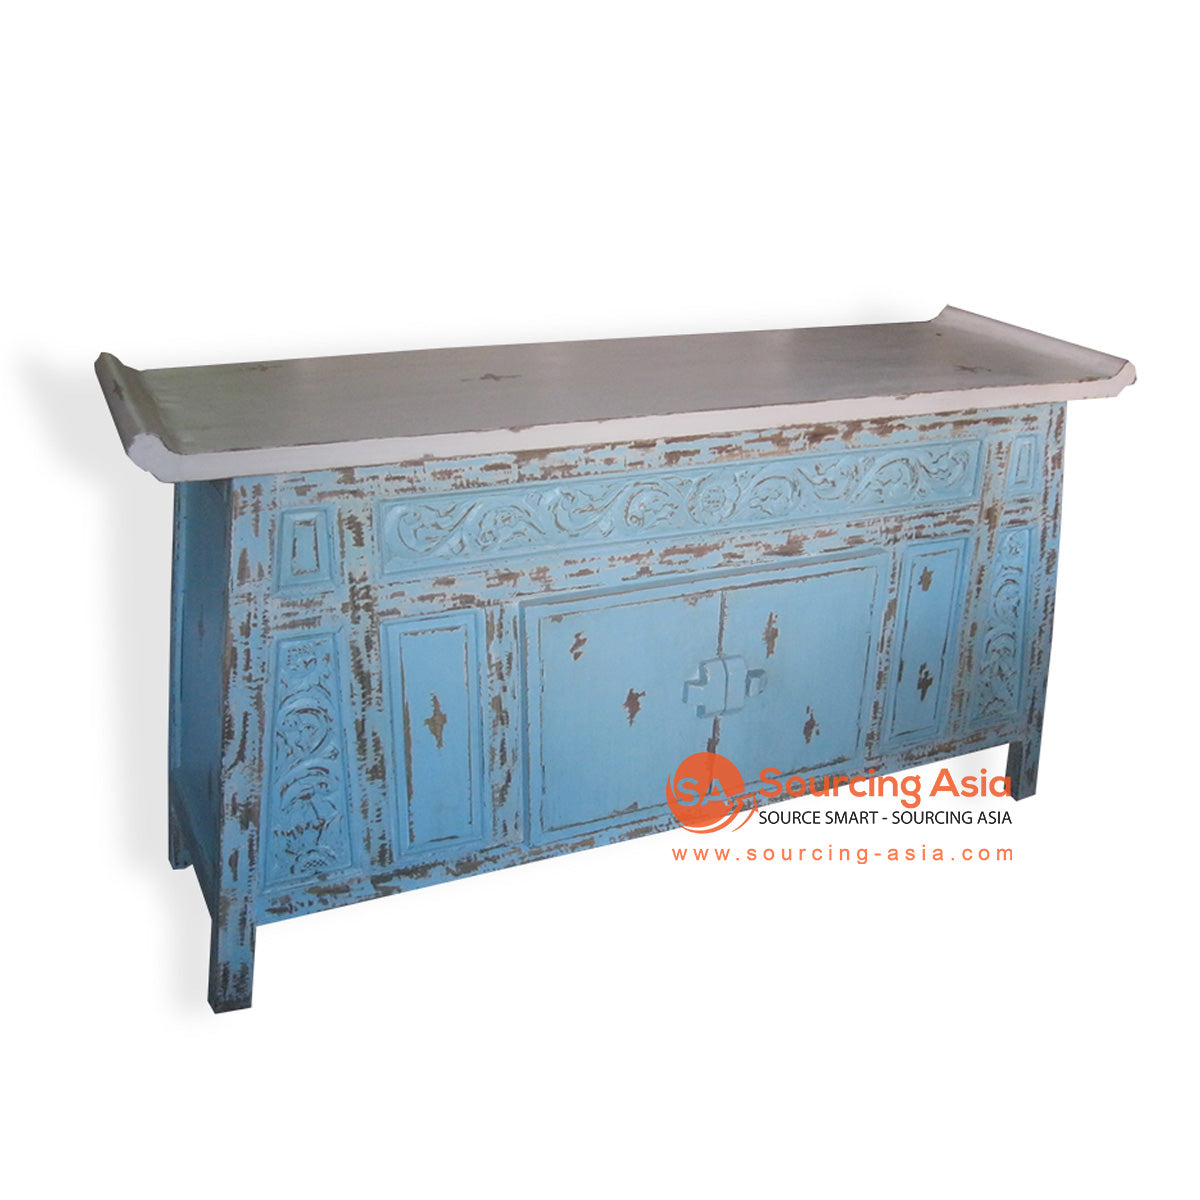 SIX018 ANTIQUE TURQUOISE RECYCLED TEAK WOOD TWO DOORS CARVED BUFFET